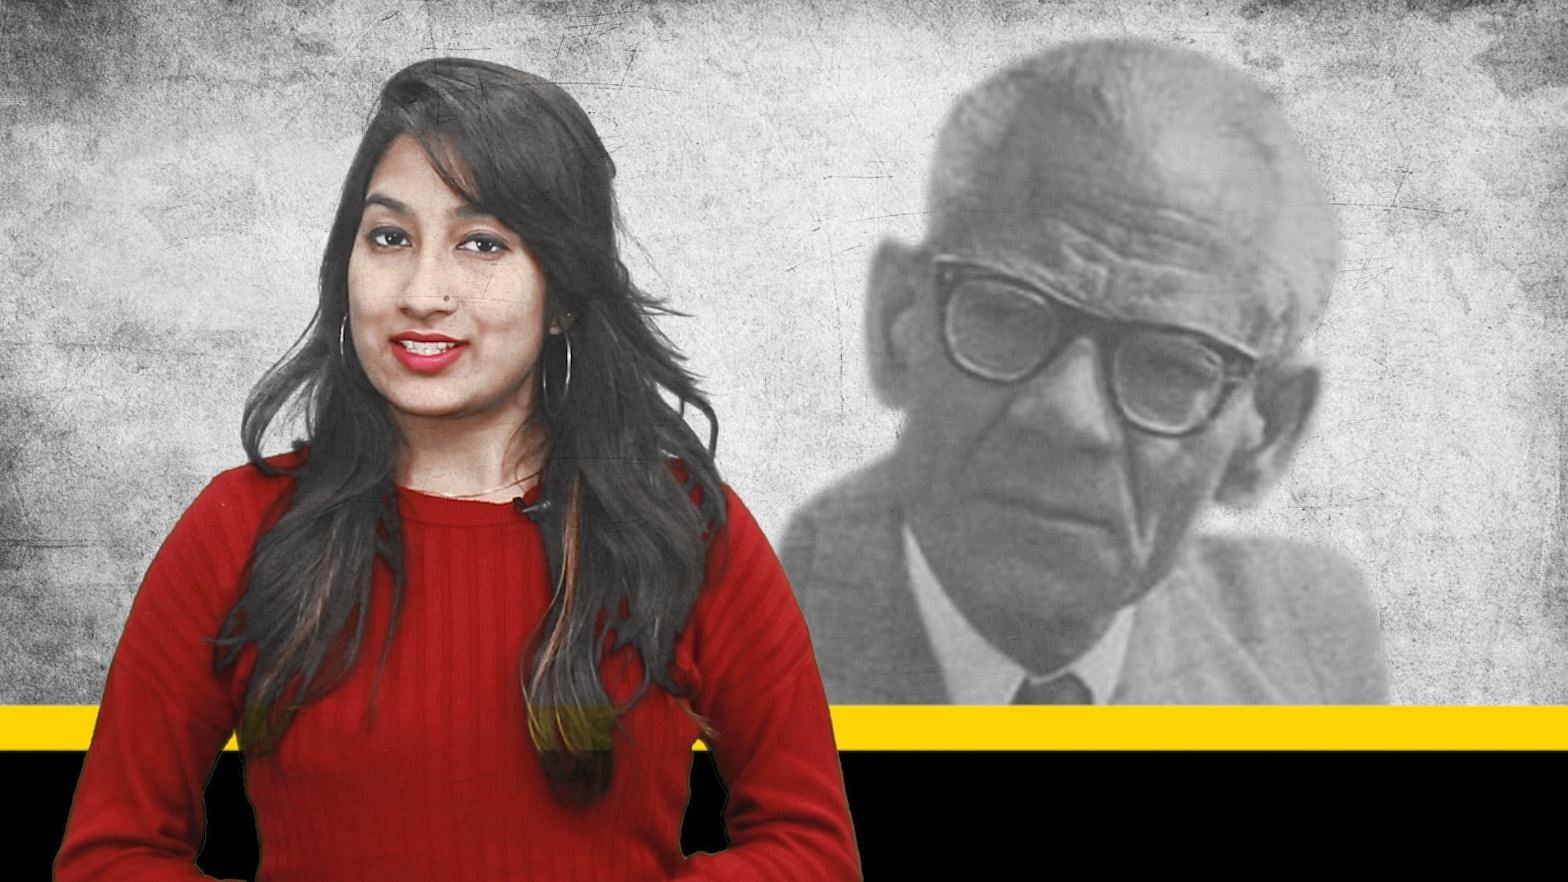 Meet Yashpal, a writer, freedom fighter and a revolutionary.